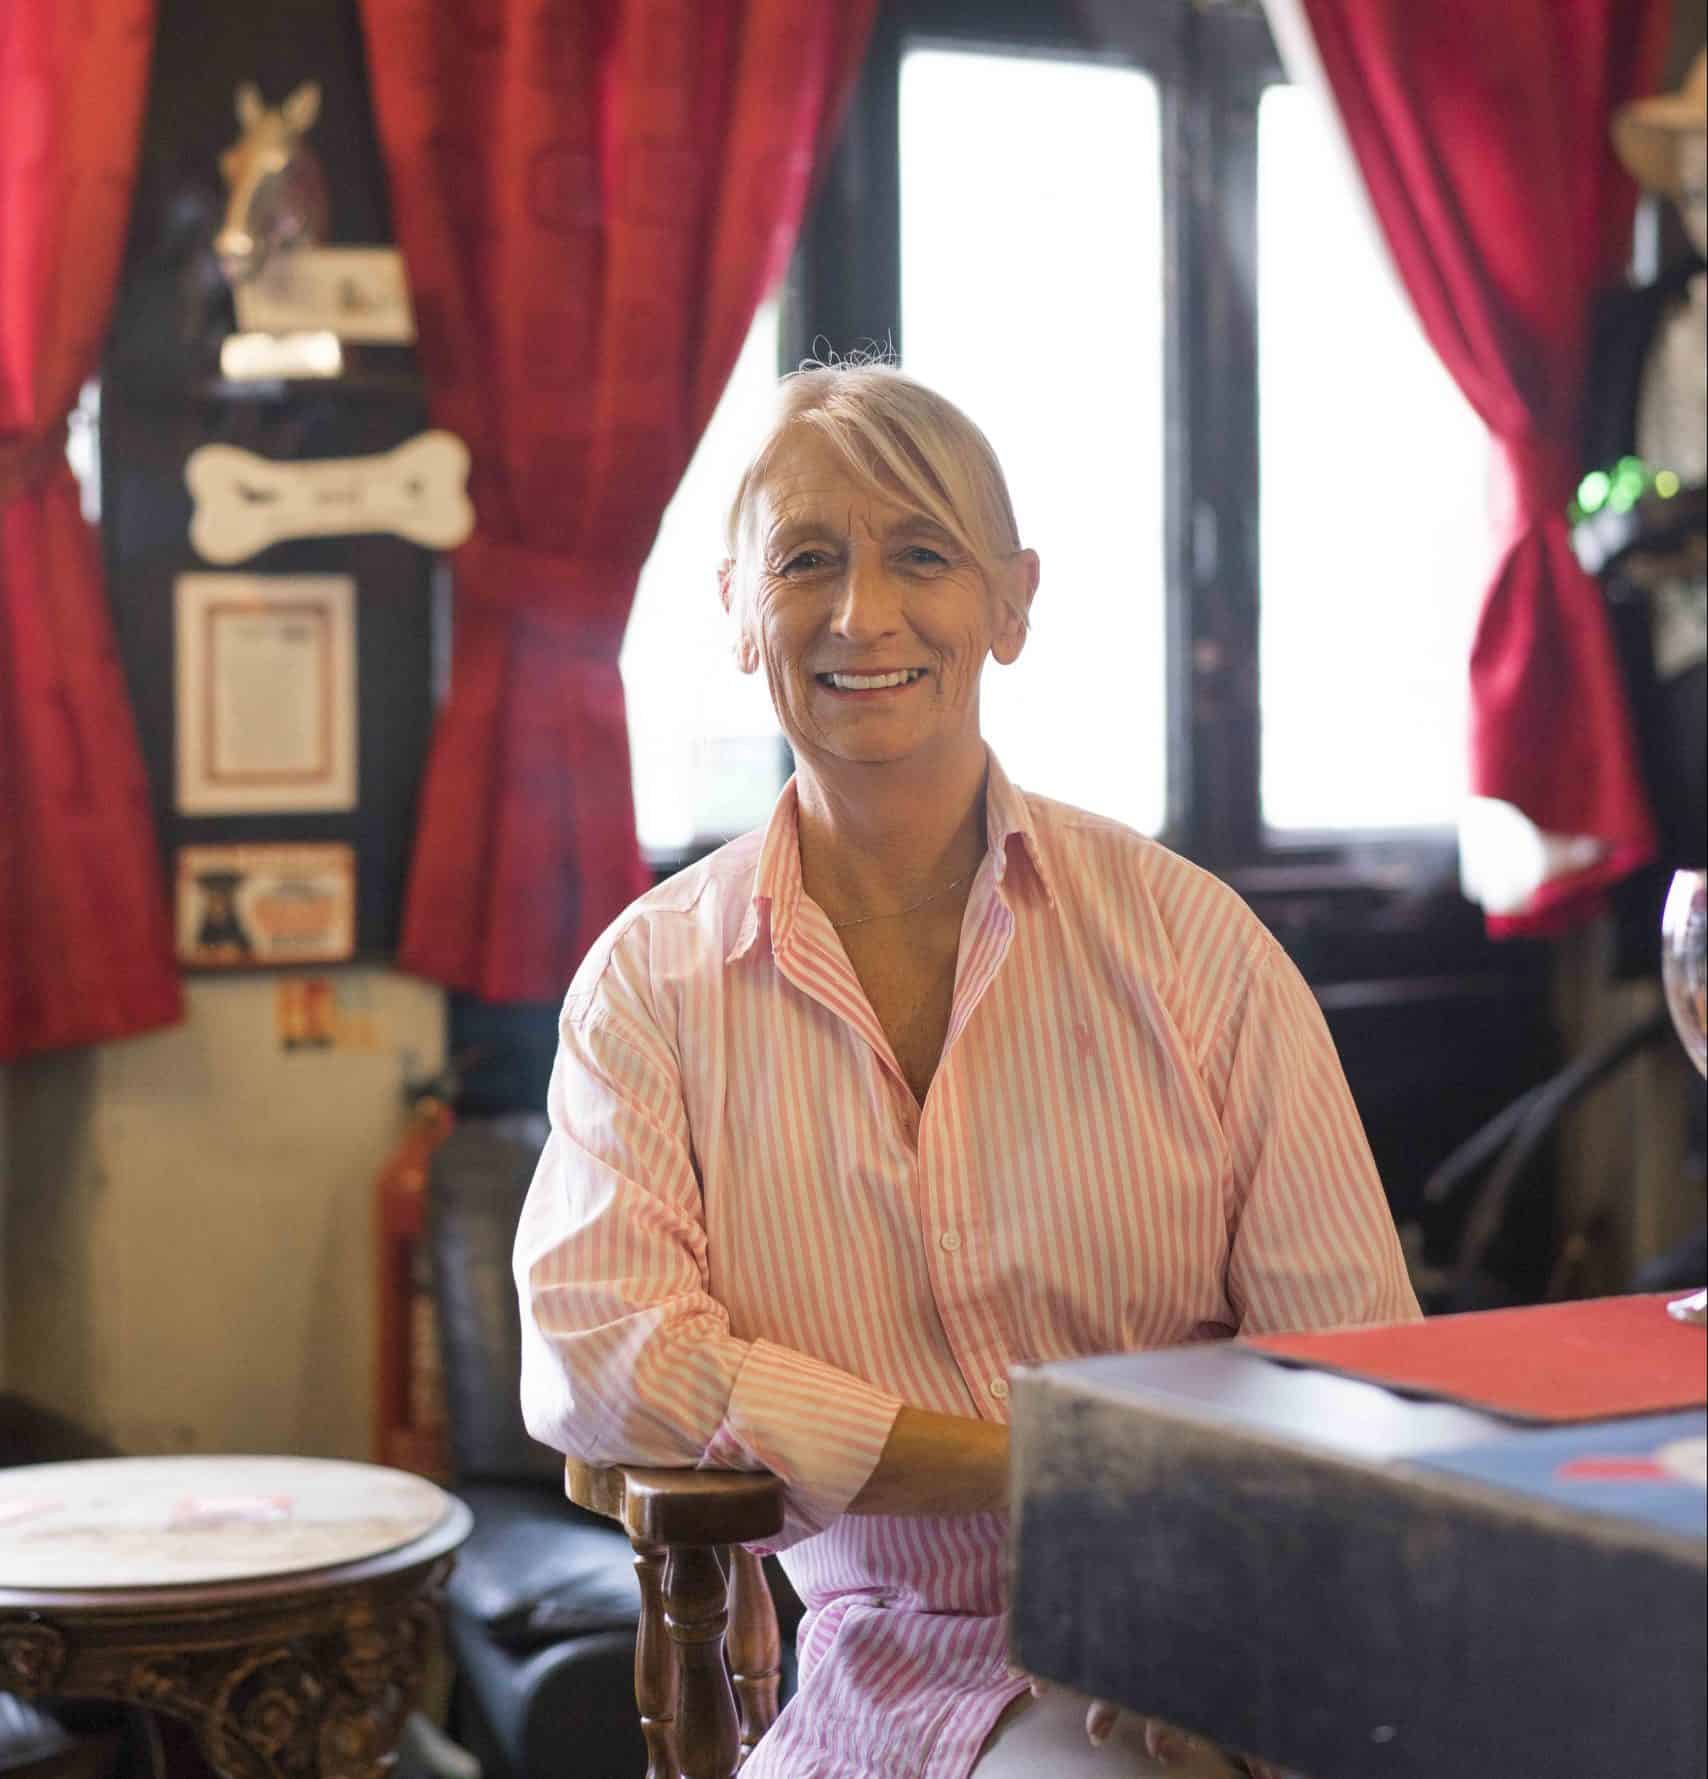 Julie, the landlady at the Nag's Head, pictured in July when the pub first opened after lockdown